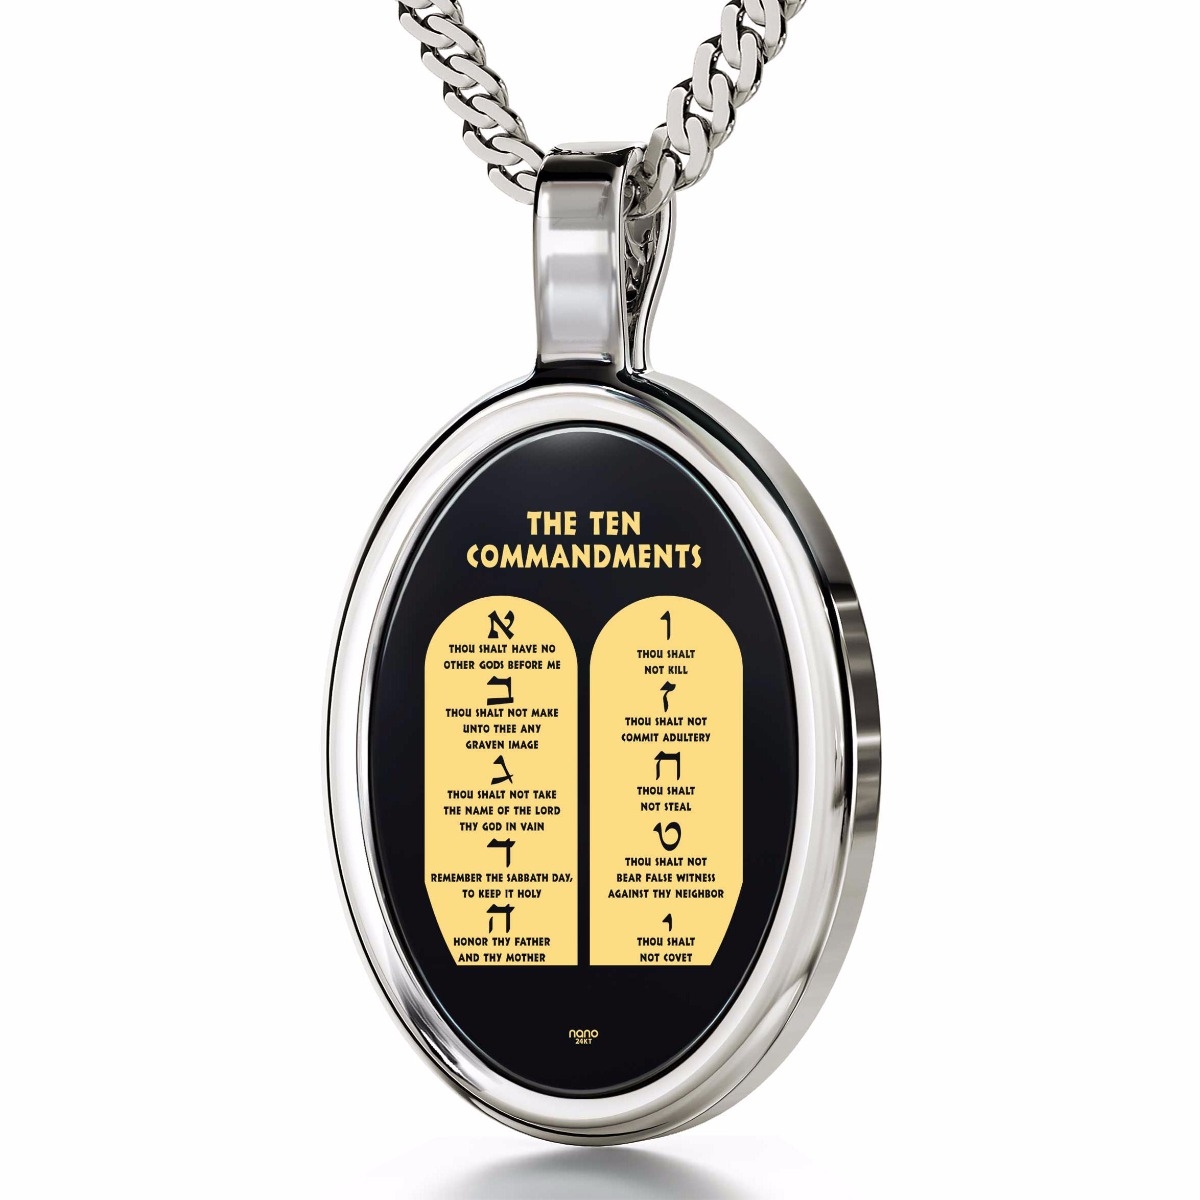 The Ten Commandments: Sterling Silver and Onyx Necklace Micro-Inscribed with 24K Gold - 1